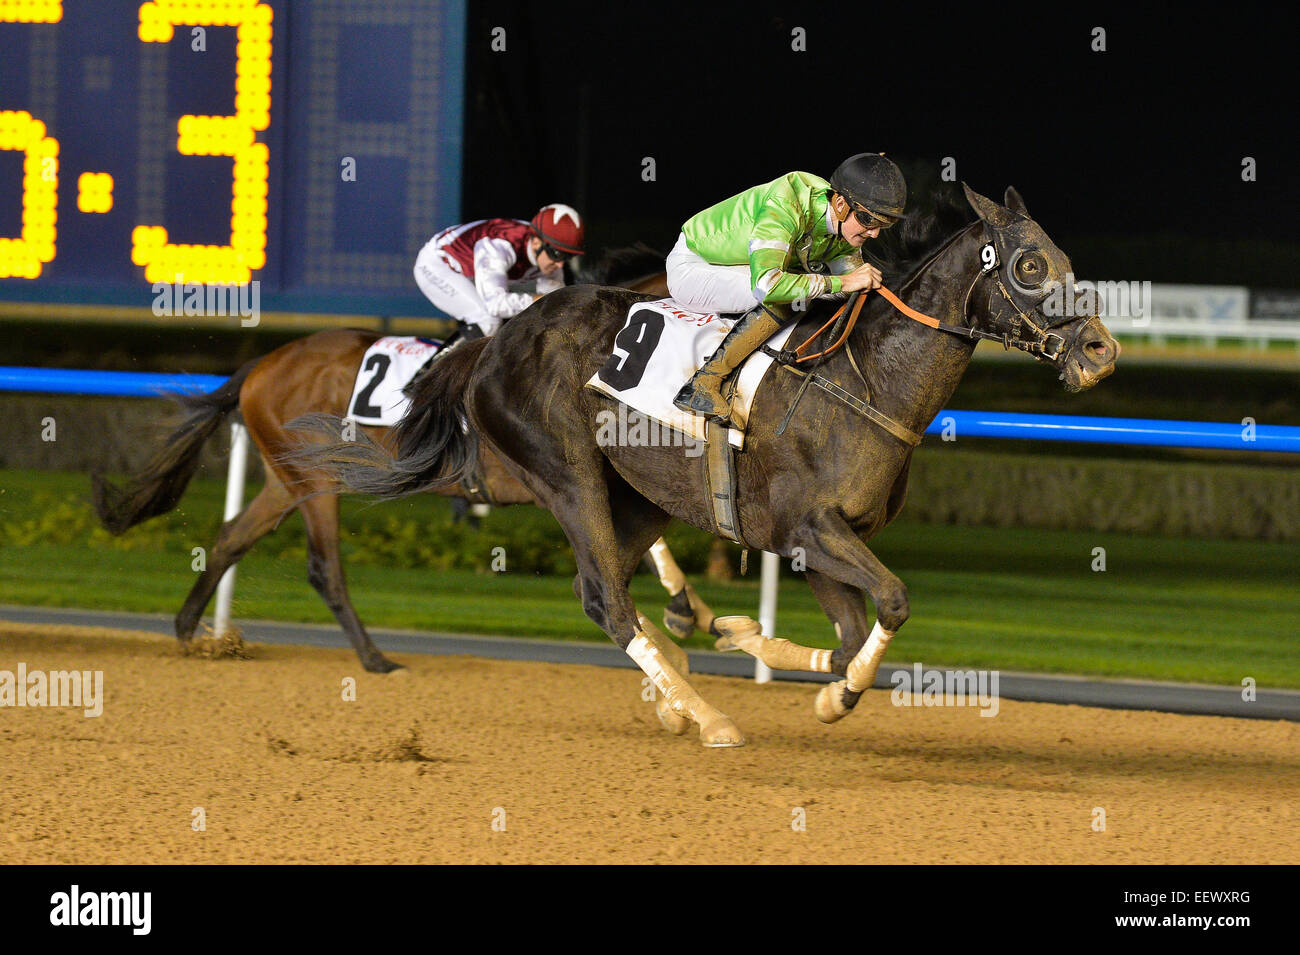 Dubai, UAE. 22nd January, 2015. TOOLAIN ridden by Marc Monaghan wins the Friday Handicap 2000m at the Meydan race track. The horse is trained by Satish Seemar and owned by Mansoor Mohd Jaber. Credit:  Feroz Khan/Alamy Live News Stock Photo